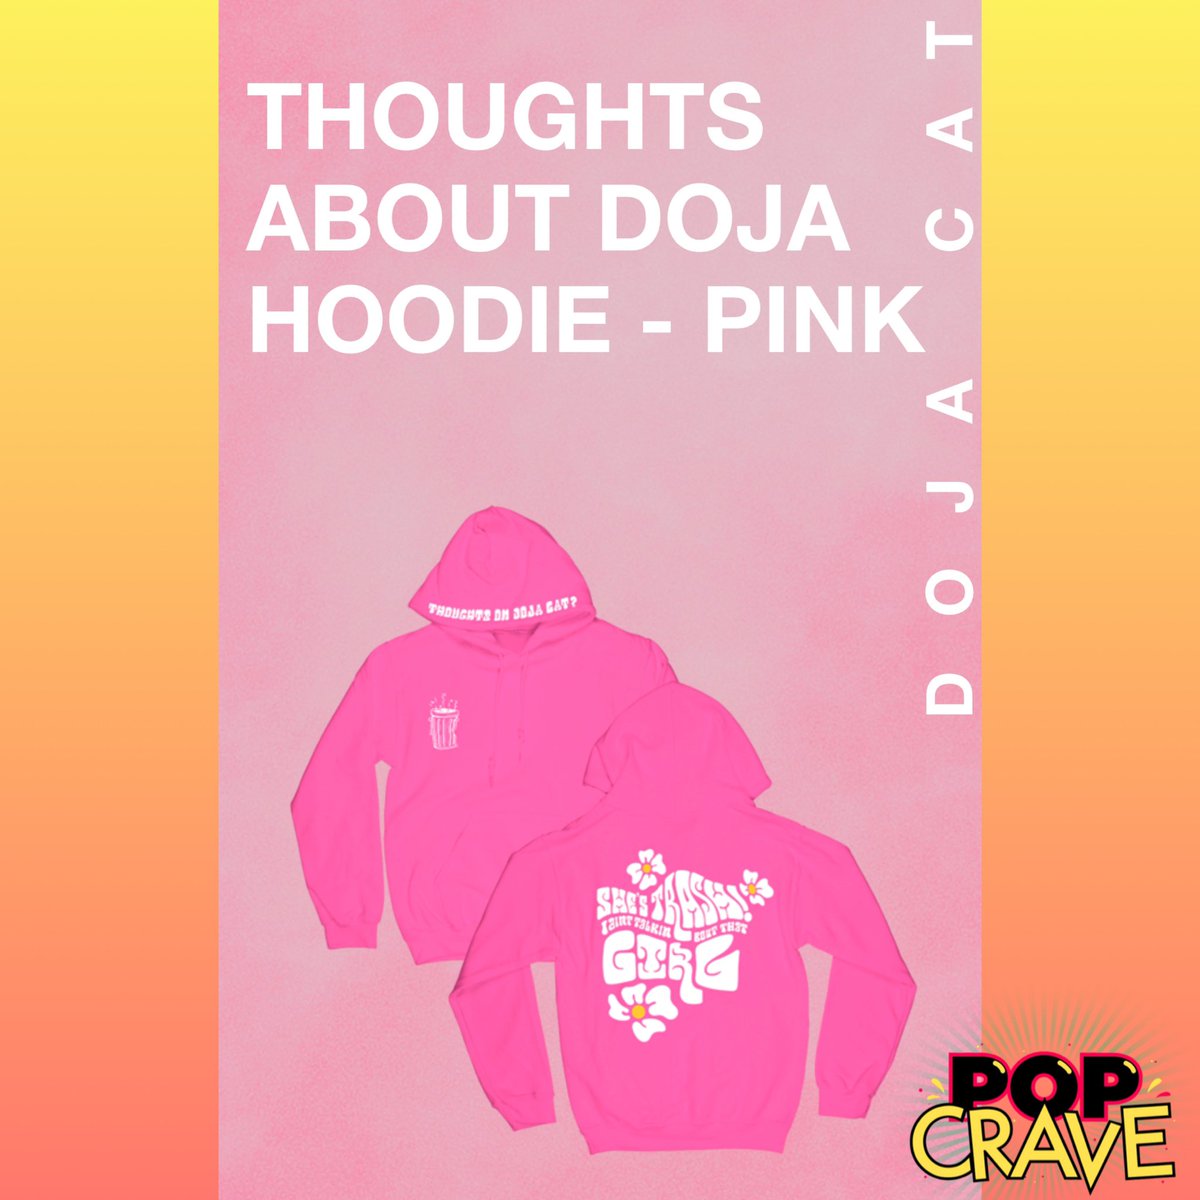 Pop Crave On Twitter Dojacat Has Released New Merch Inspired By The Thoughts About Doja Cat She S Trash I Ain T Talking About That Girl Viral Video Https T Co J7c9u3bqs8